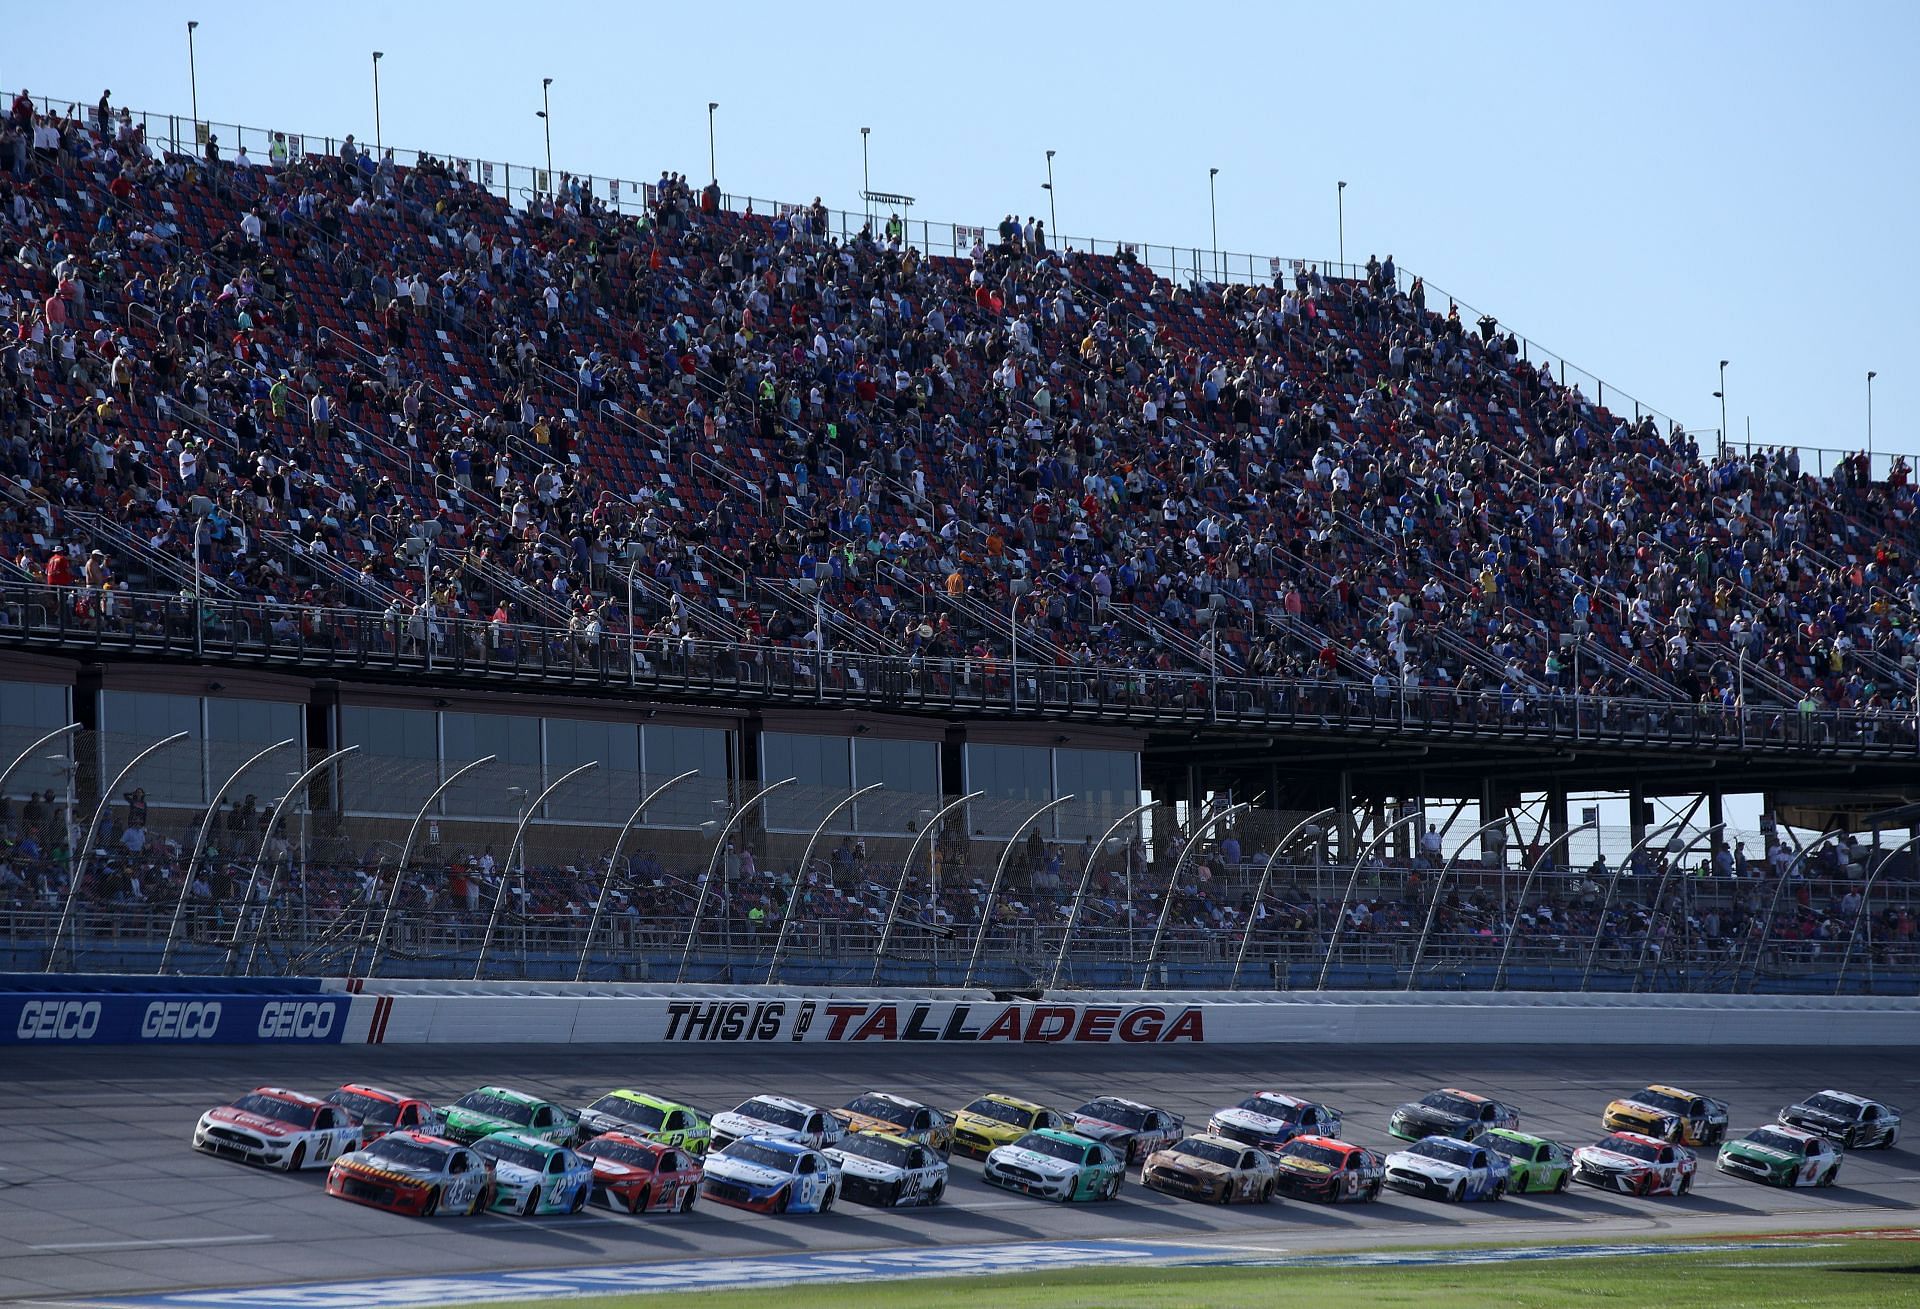 Cars race during the 2021 NASCAR Cup Series GEICO 500 at Talladega Superspeedway in Alabama. (Photo by Sean Gardner/Getty Images)